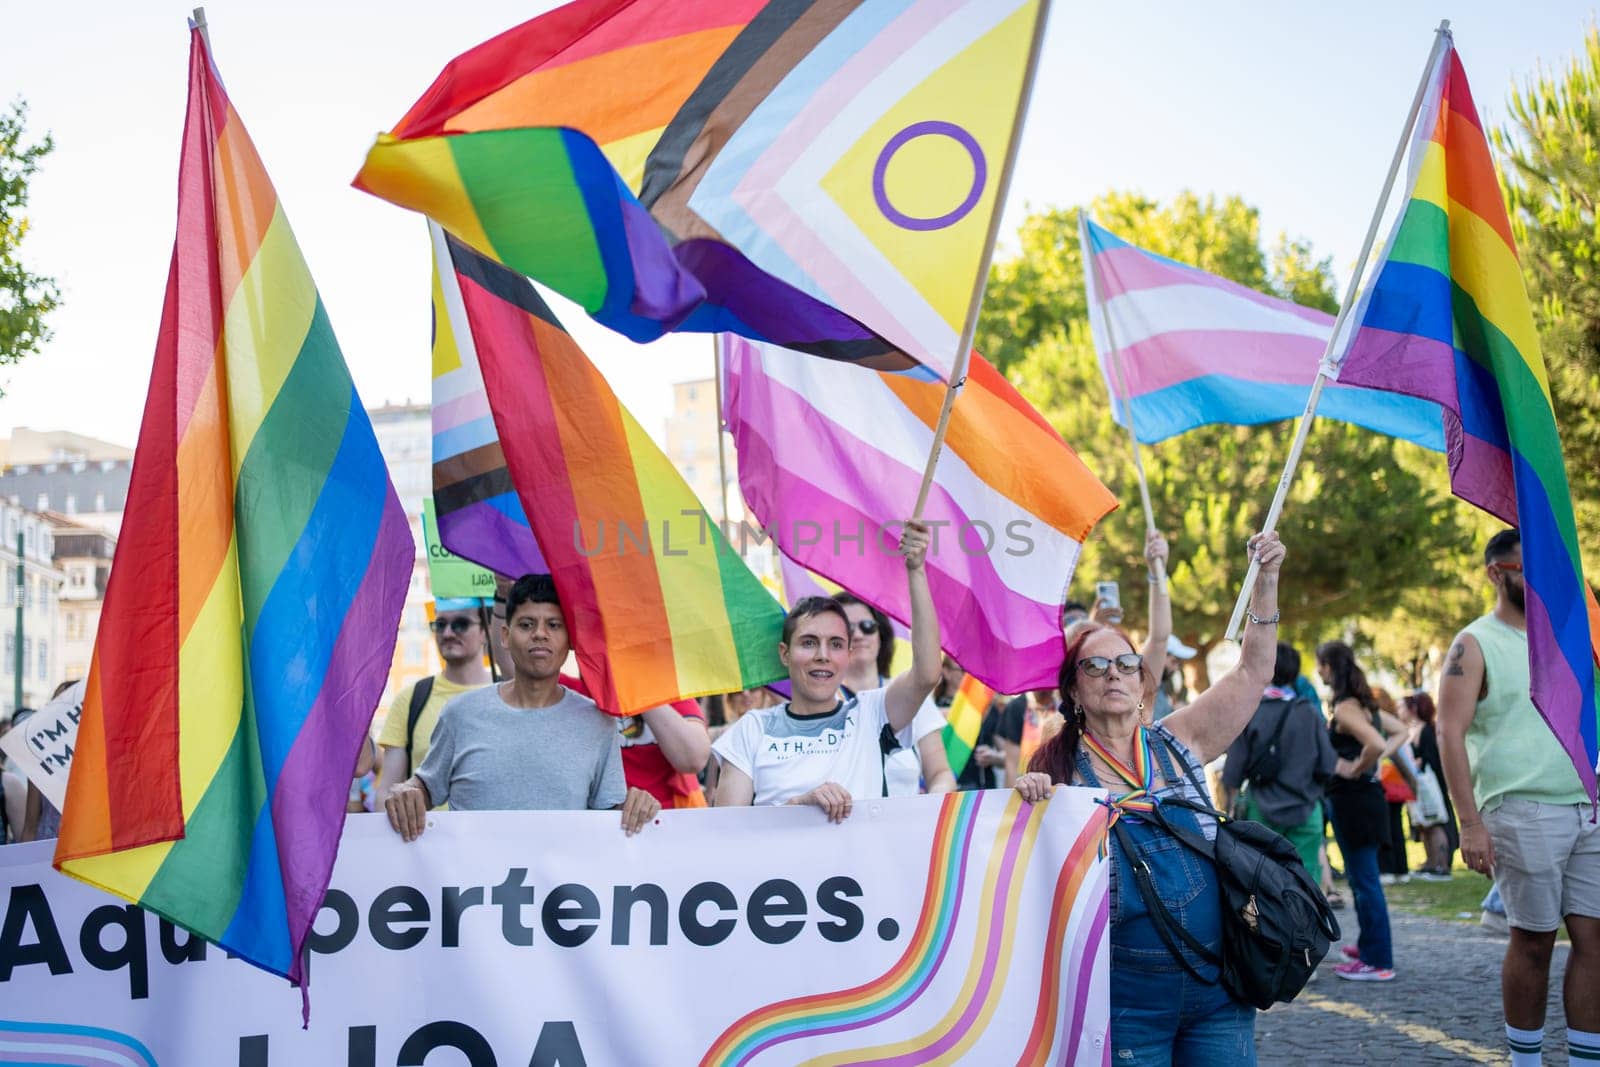 Lisbon, Portugal. 17 June 2023: LGBTQ parade in support of people of non-traditional orientation. Cheerful people carrying rainbow flags and banners. LGBTQ activists at Pride Parade